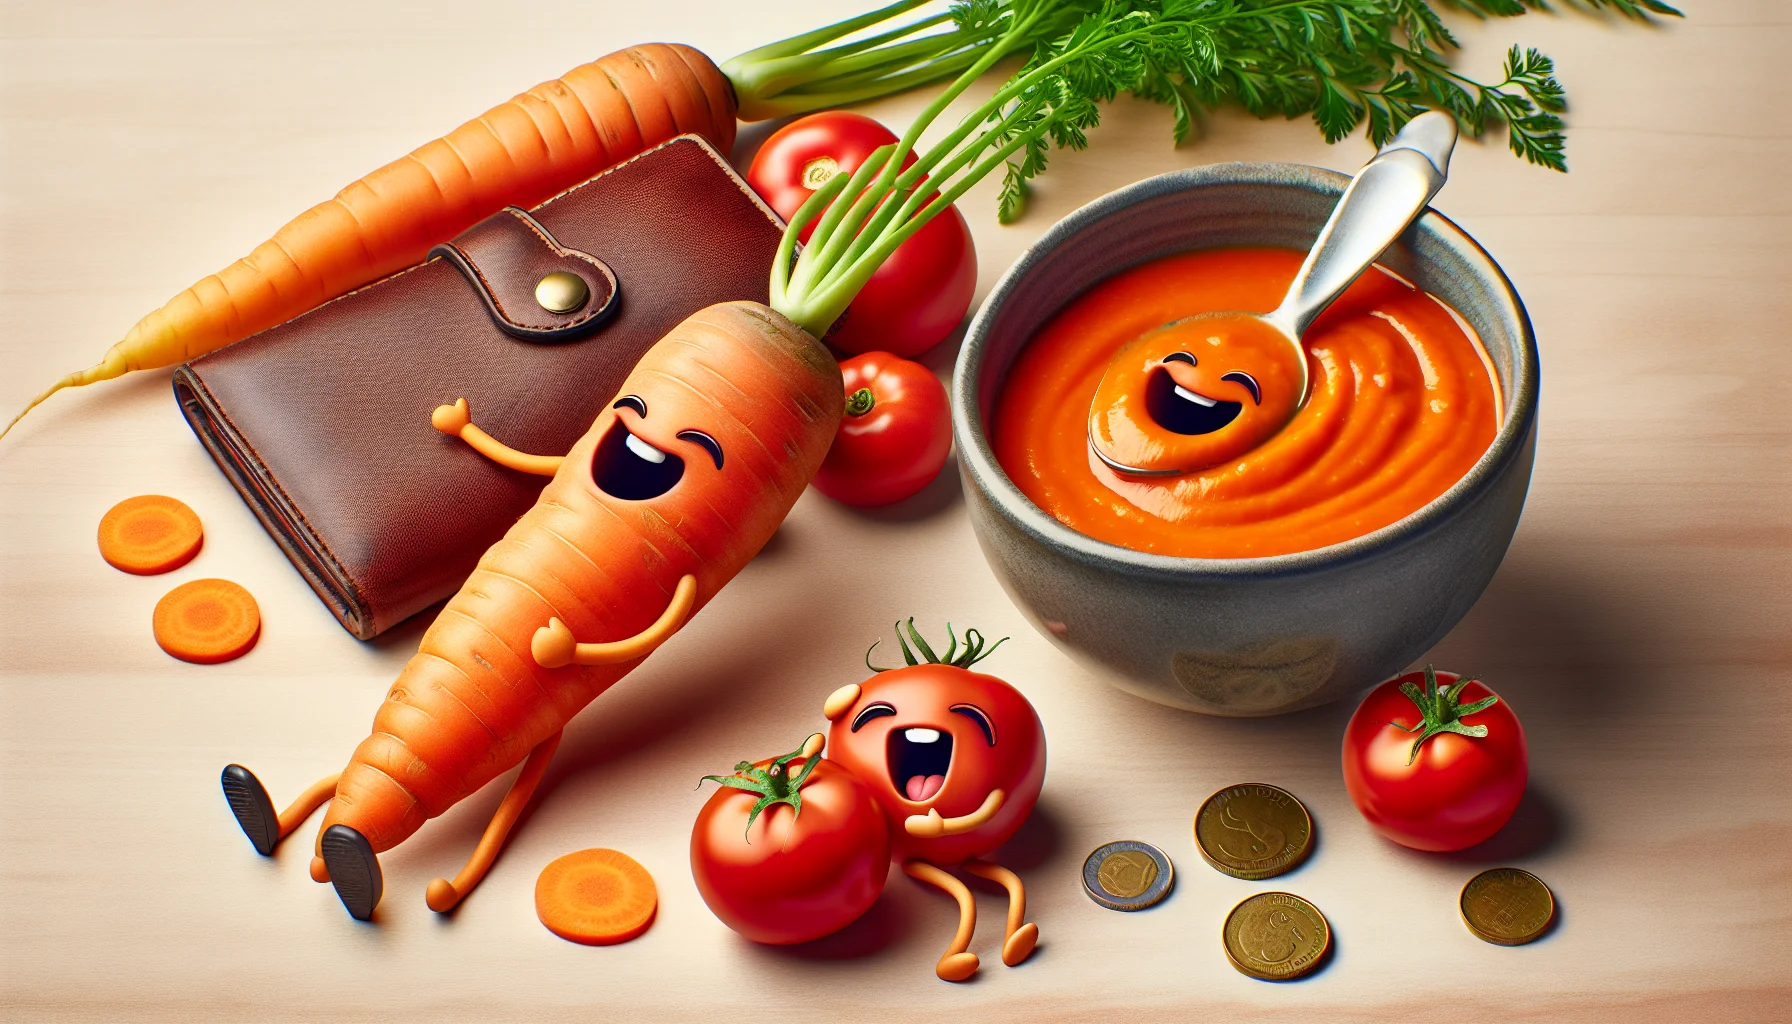 Imagine a humorous and enticing scenario depicting a bowl of tomato carrot soup. The beautifully blended soup has an inviting deep orange color, with visible chunks of soft carrot and luscious puree of ripe tomatoes. A playful little spoon character is diving into the bowl as if it was a pool, with a big satisfying smile on the spoon's face. Nearby, you see a wallet and a coin, both laughing as they hug in tranquility, surrounded by inexpensively priced vegetables like carrots, tomatoes, and other healthy ingredients. They are all enticing viewers into considering the affordability and health benefits of homemade food.